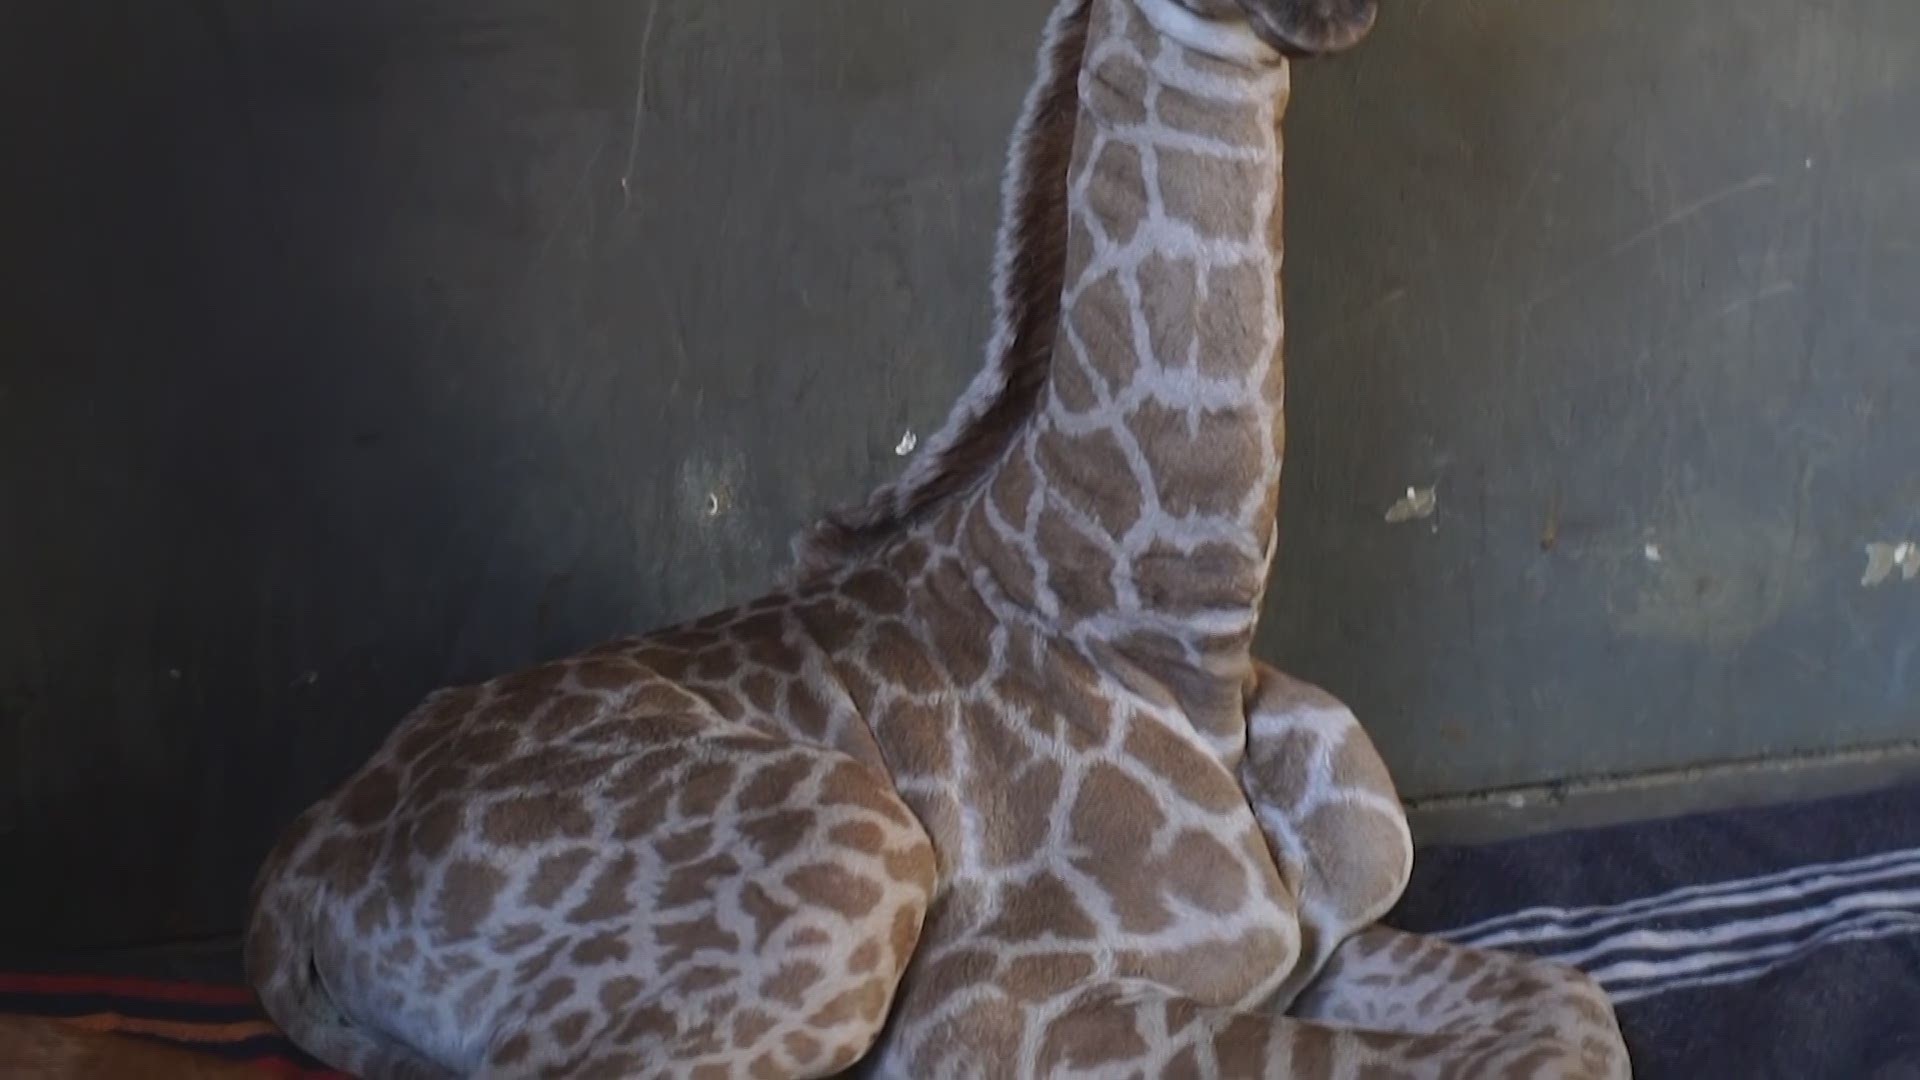 A baby giraffe found in a comatose state after being abandoned by his mother has a new protector, Hunter the dog.